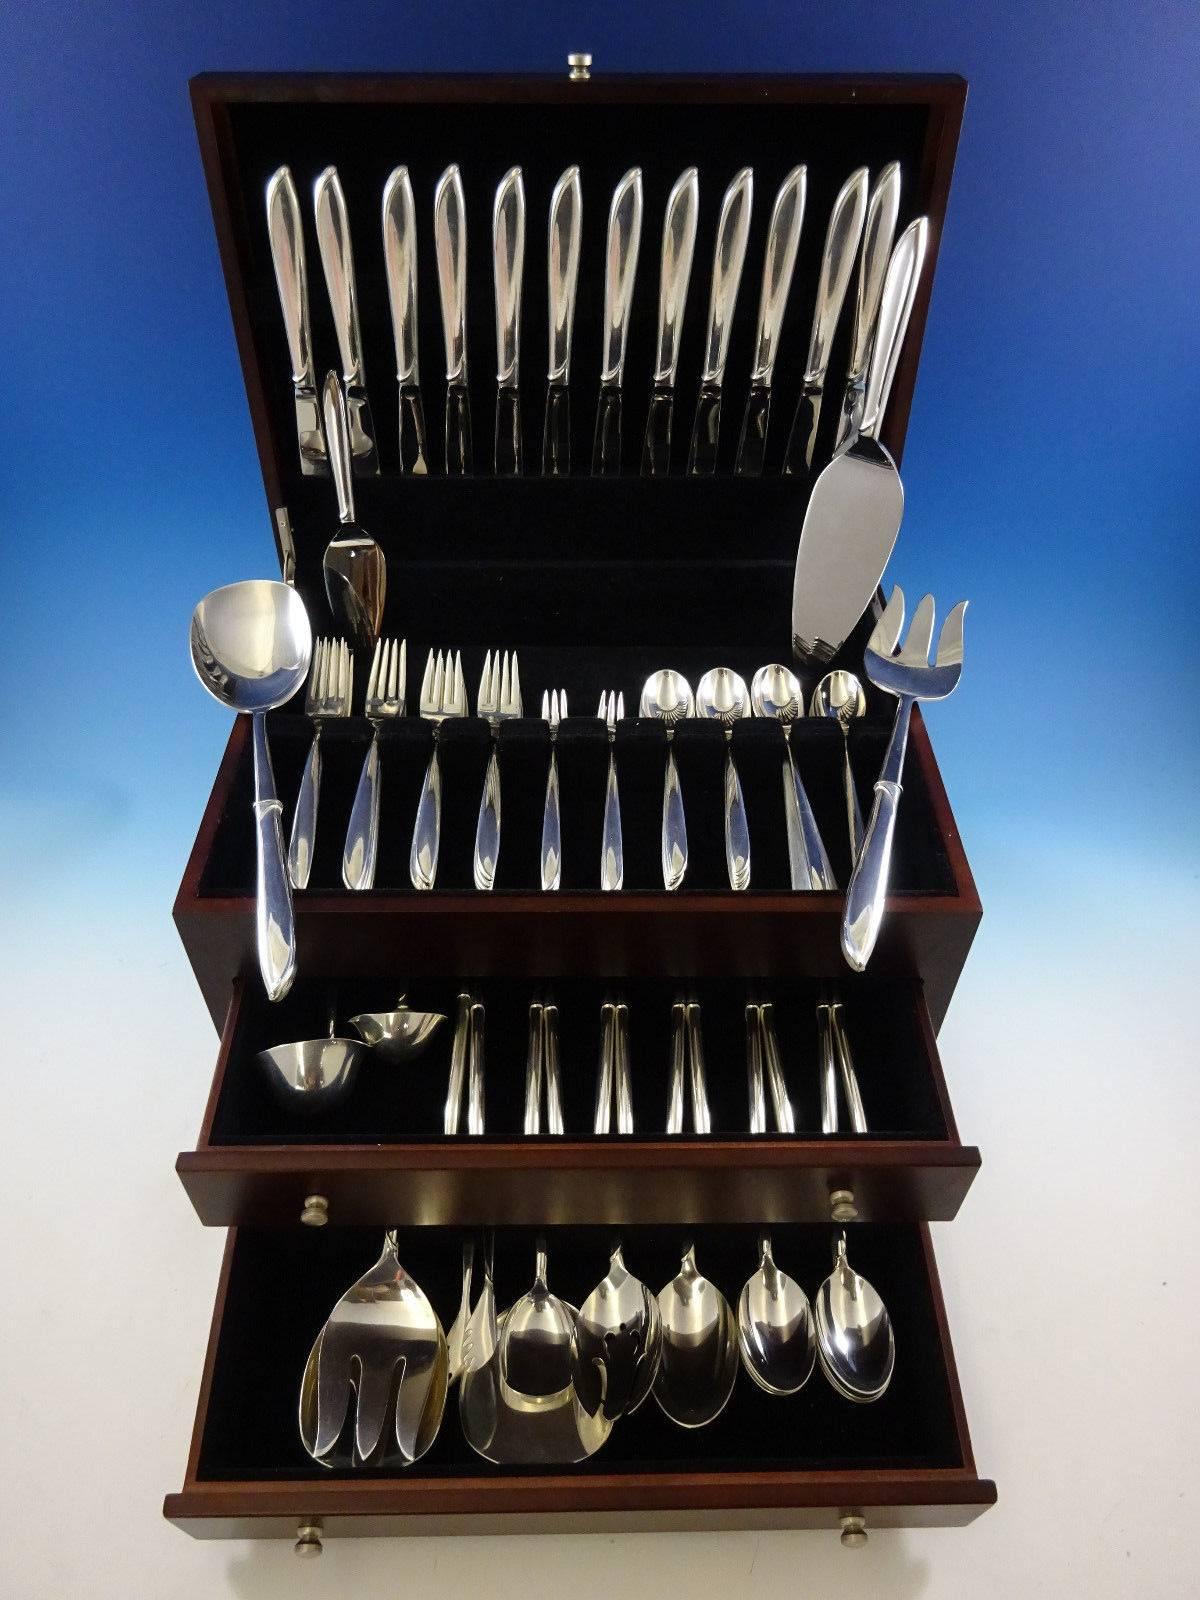 Mid-Century Modern Silver Rhythm by International sterling silver flatware set of 110 pieces. This set includes: 

12 knives, 9 1/4